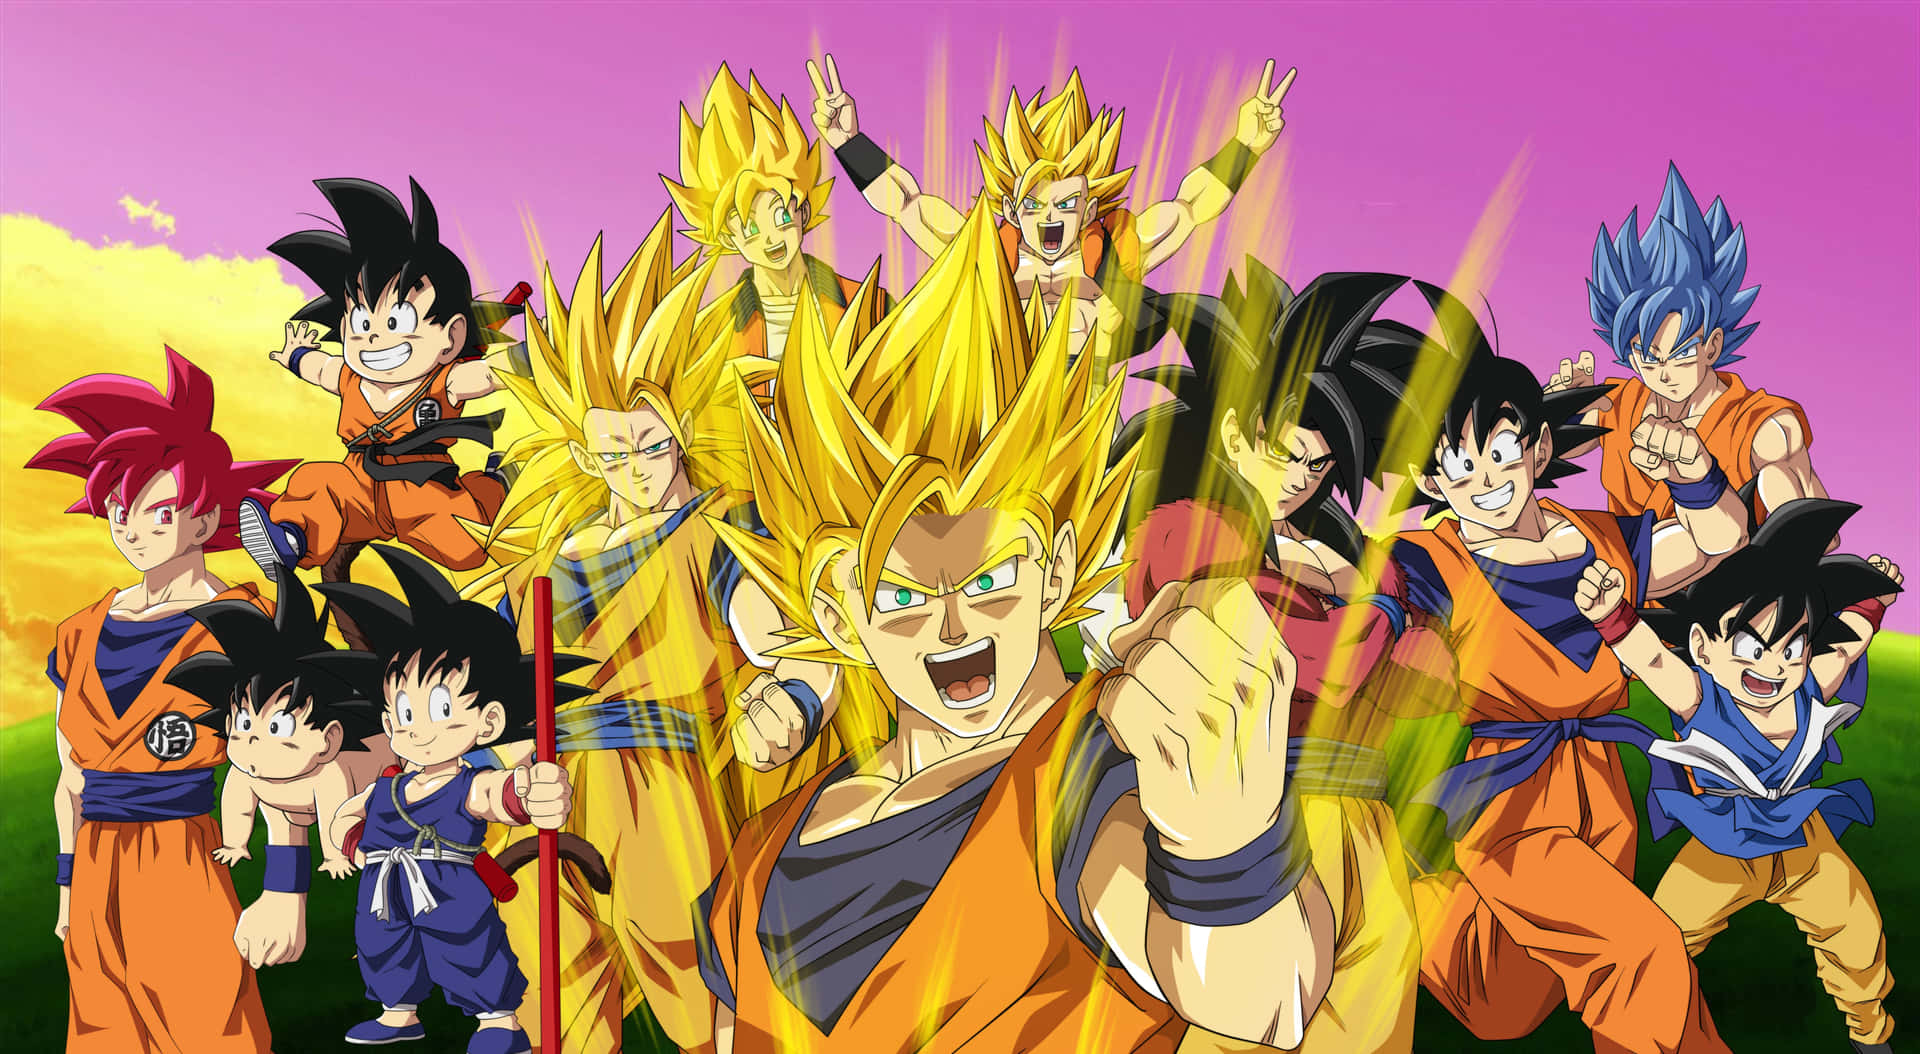 Explore the colorful and exciting world of Dragon Ball with this vivid landscape Wallpaper